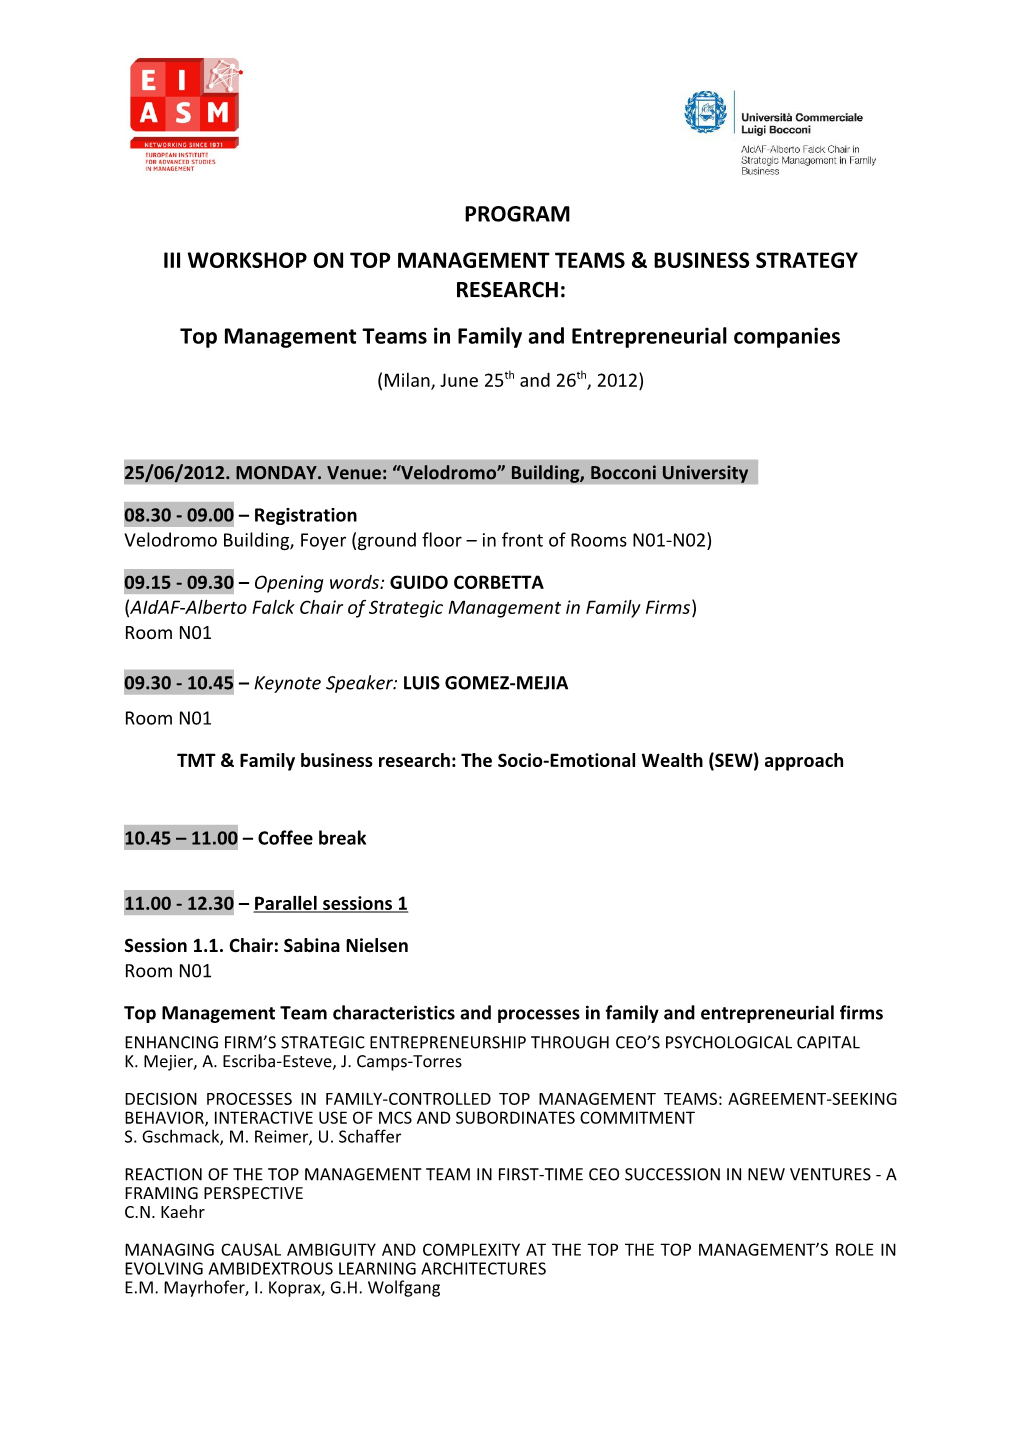 Iii Workshop on Top Management Teams & Business Strategy Research